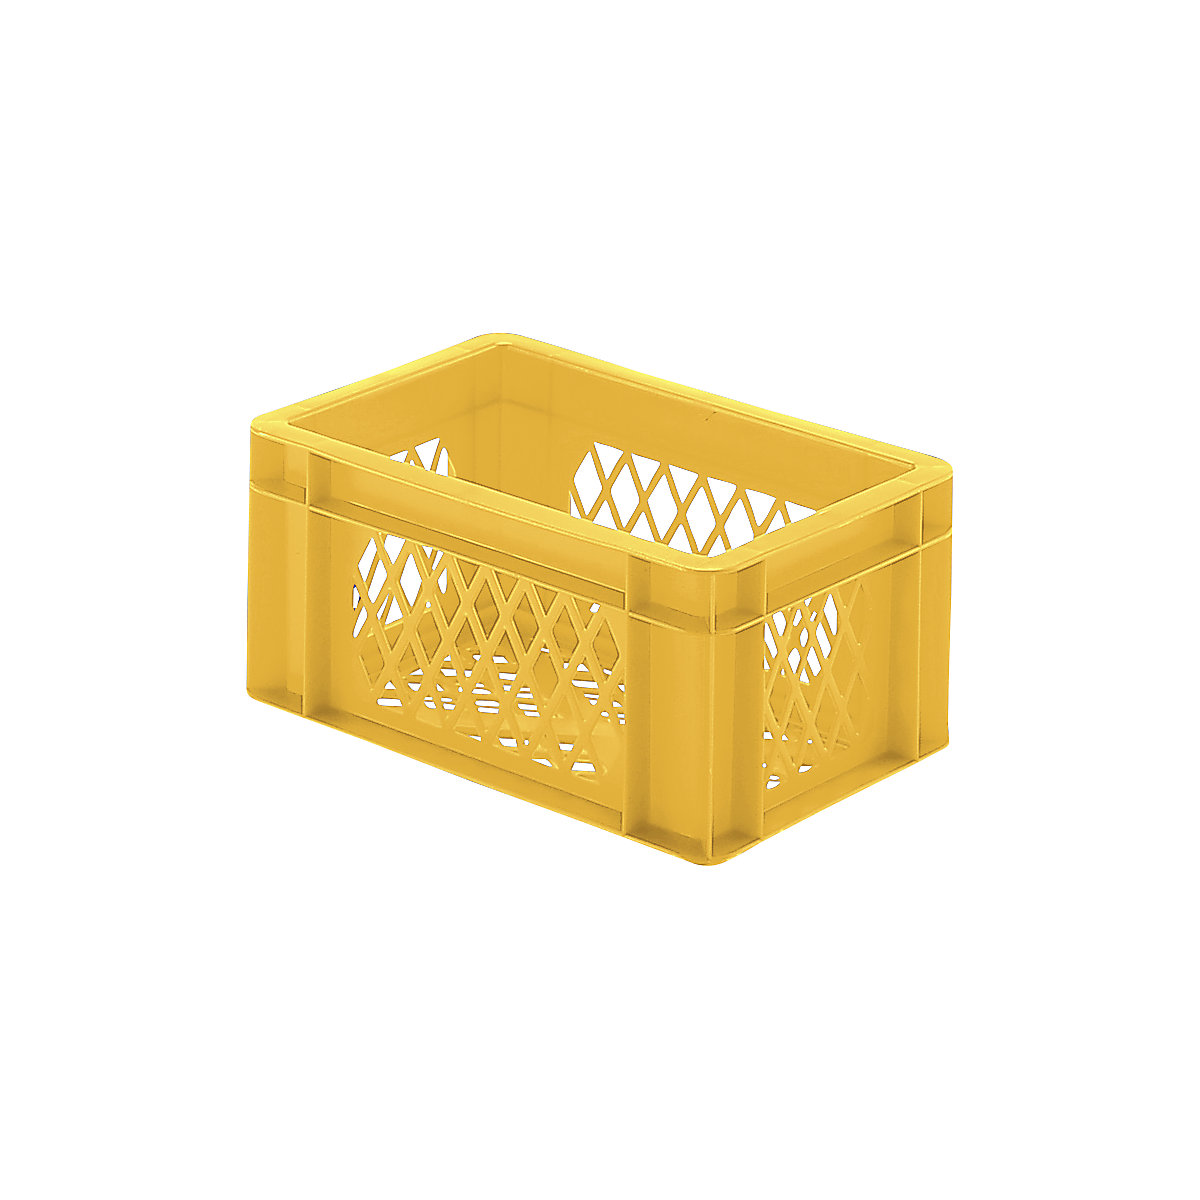 Euro stacking container, perforated walls and base, LxWxH 300 x 200 x 145 mm, yellow, pack of 5